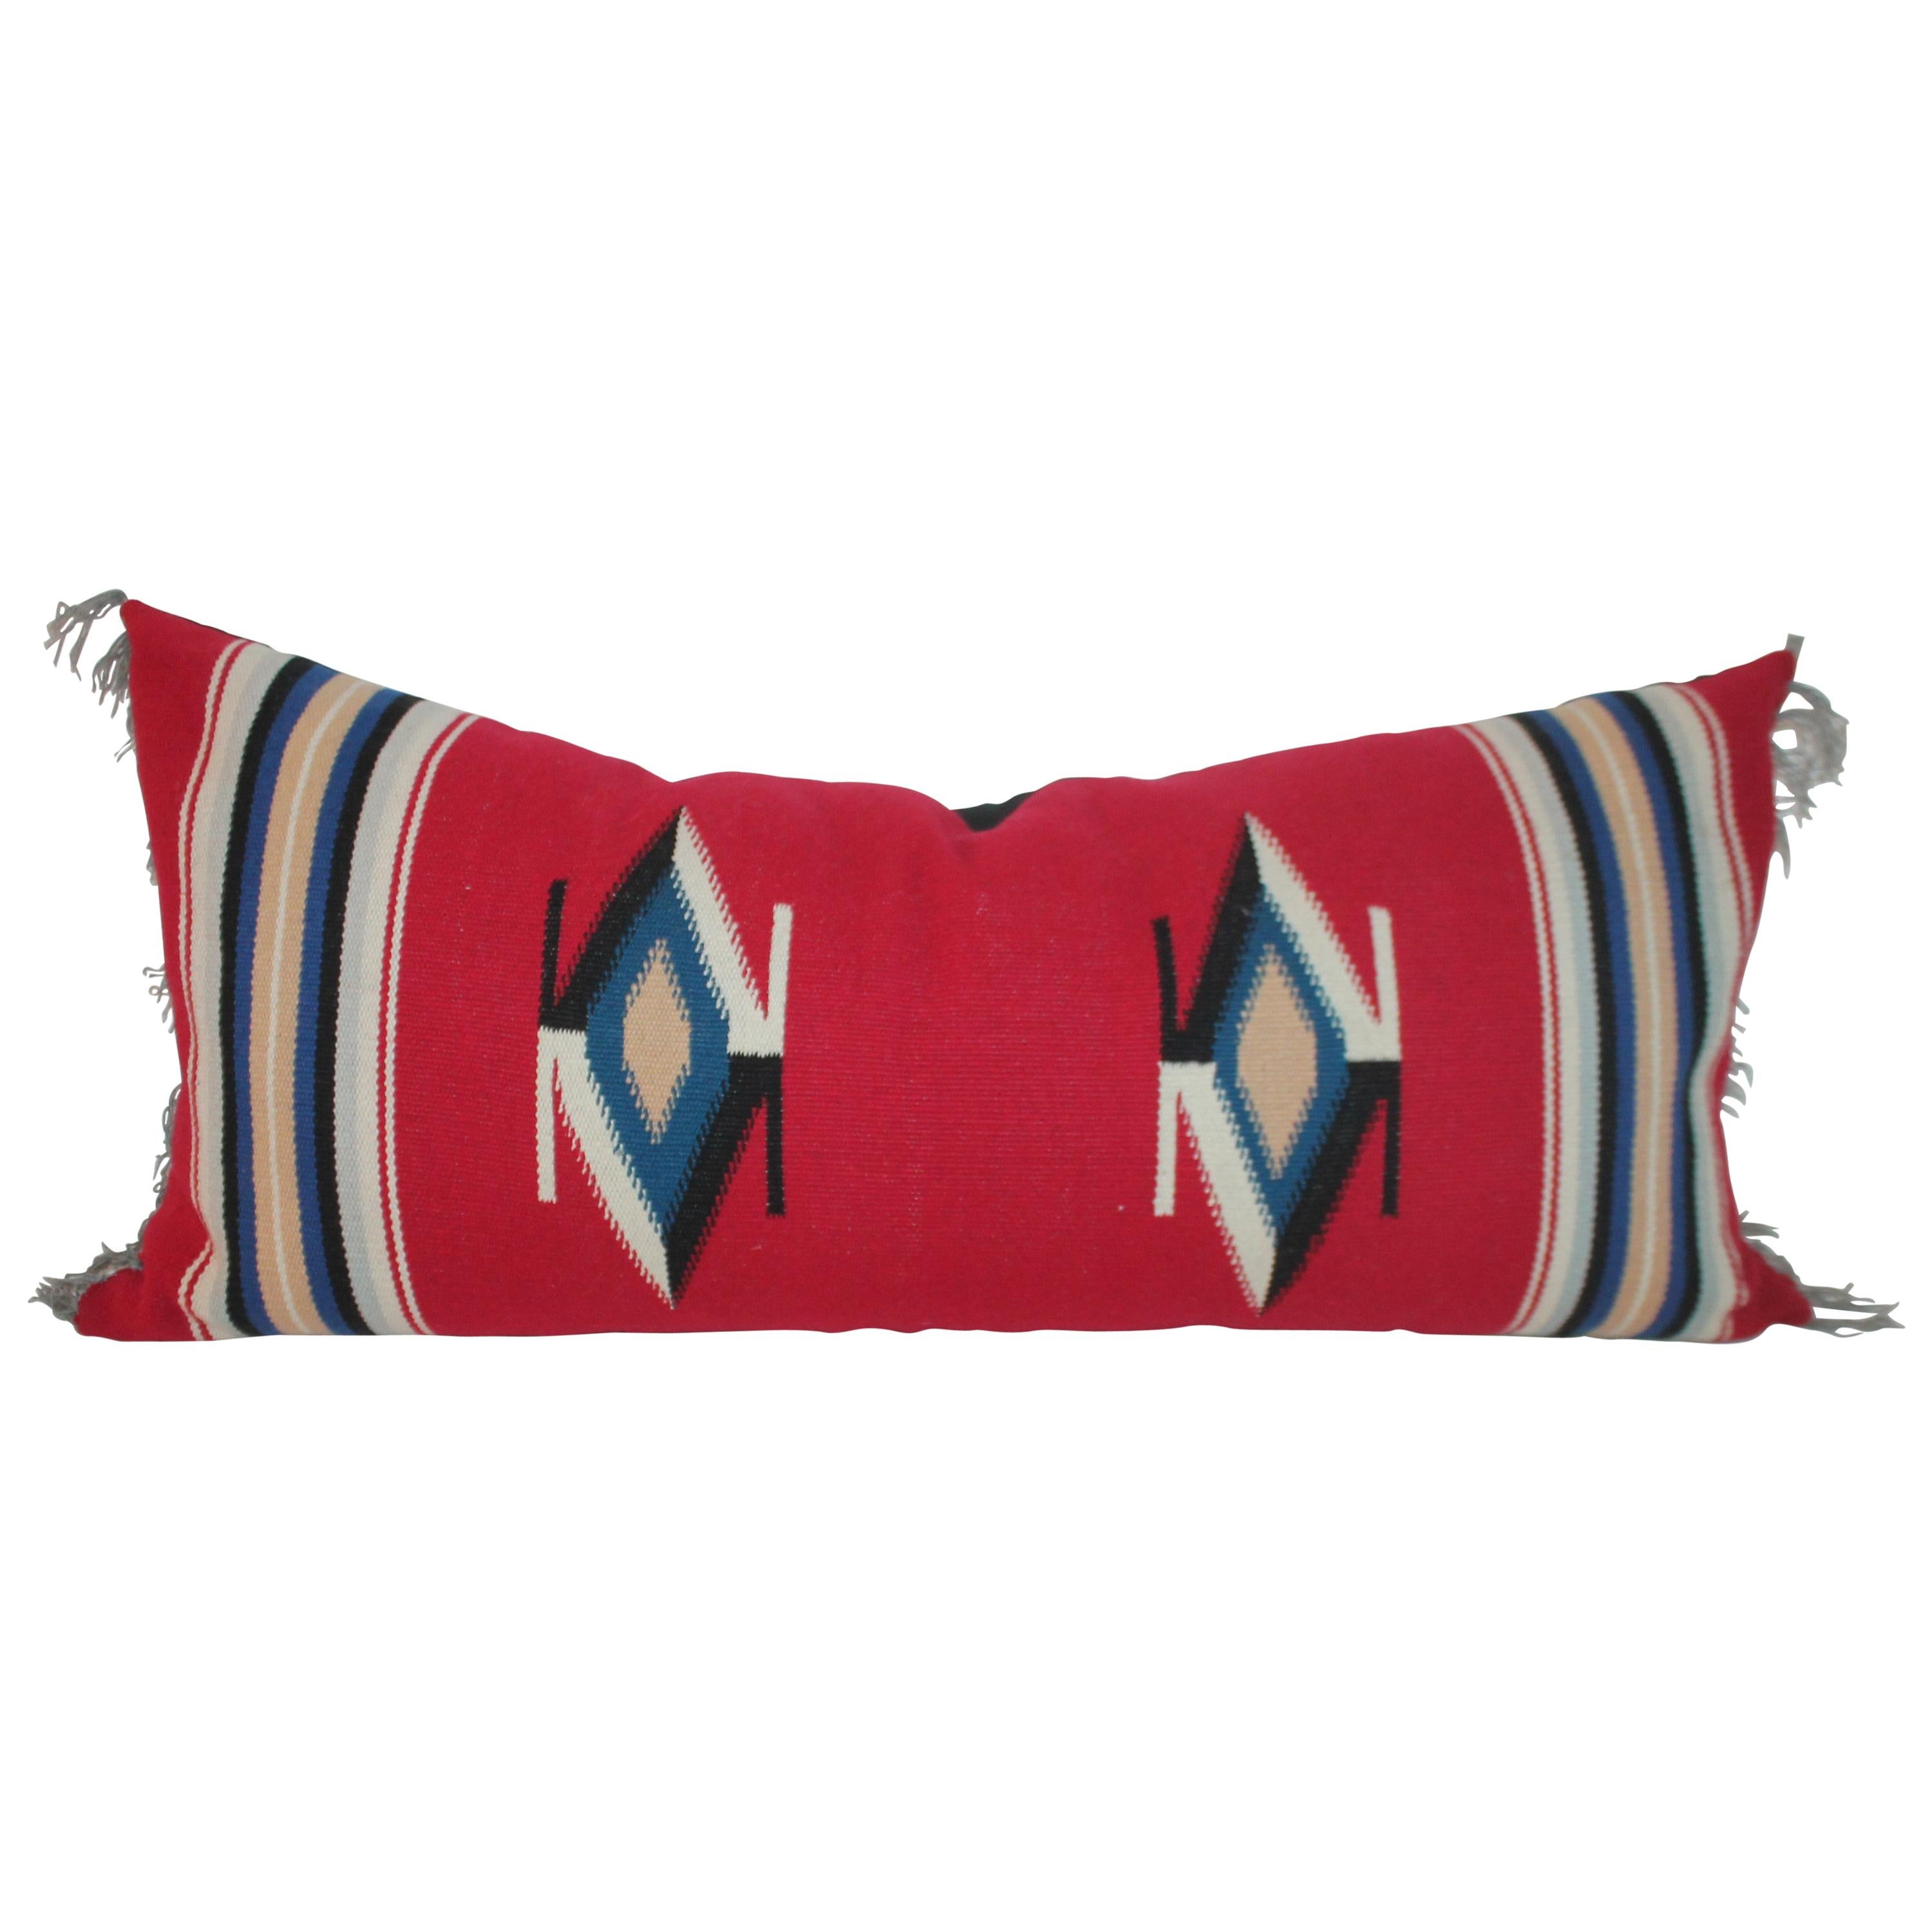 Large Red Eye Dazzler Pillow with Fringe